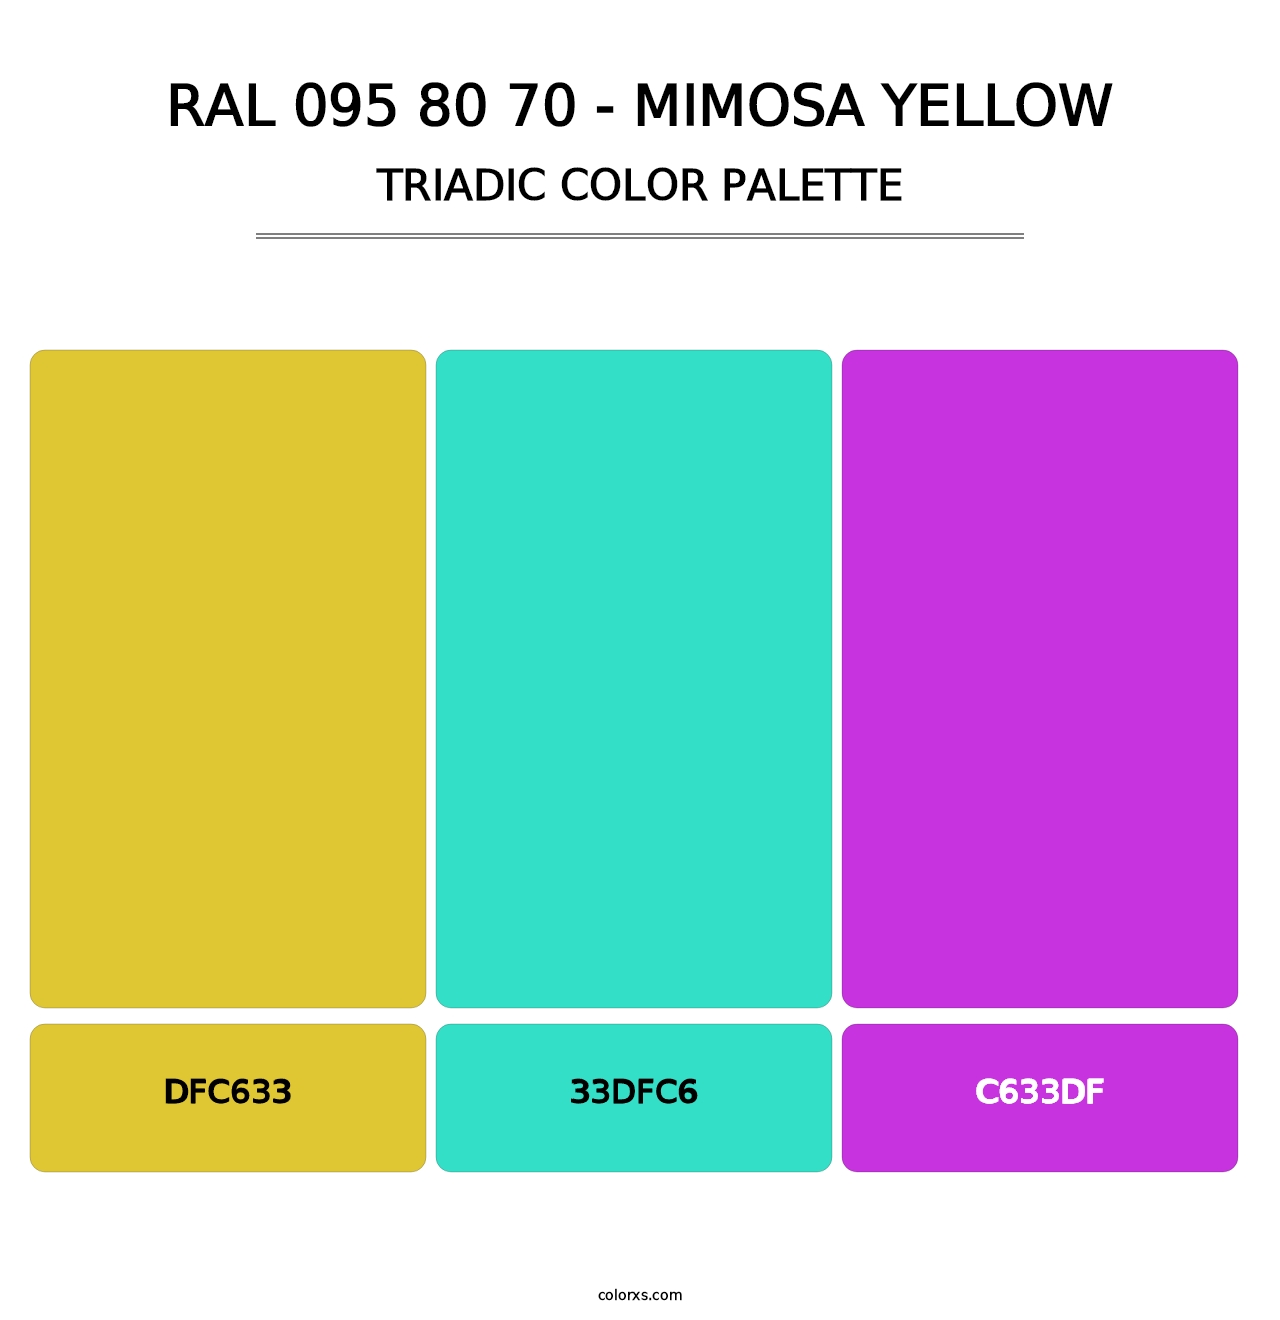 RAL 095 80 70 - Mimosa Yellow - Triadic Color Palette